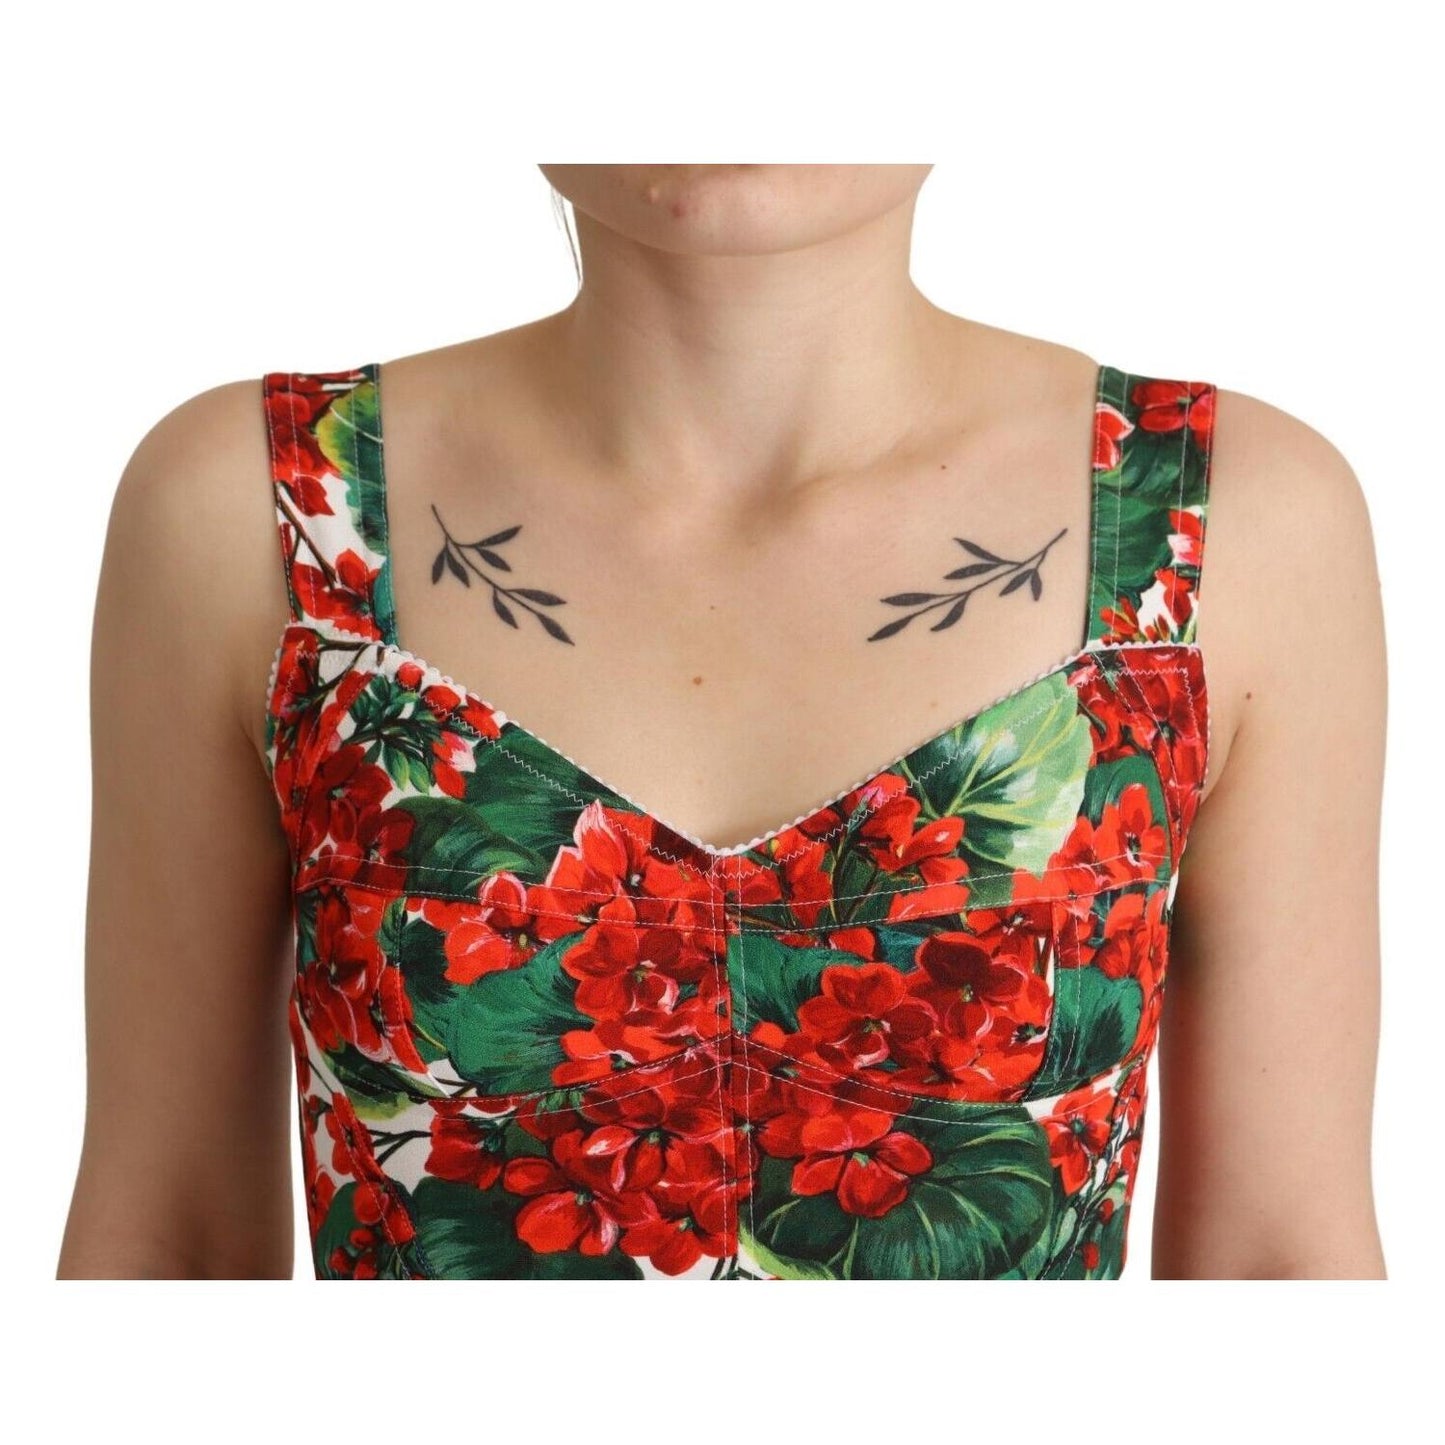 Dolce & Gabbana Elegant Red Cropped Top with Geranium Print red-geranium-print-viscose-sweetheart-cropped-top